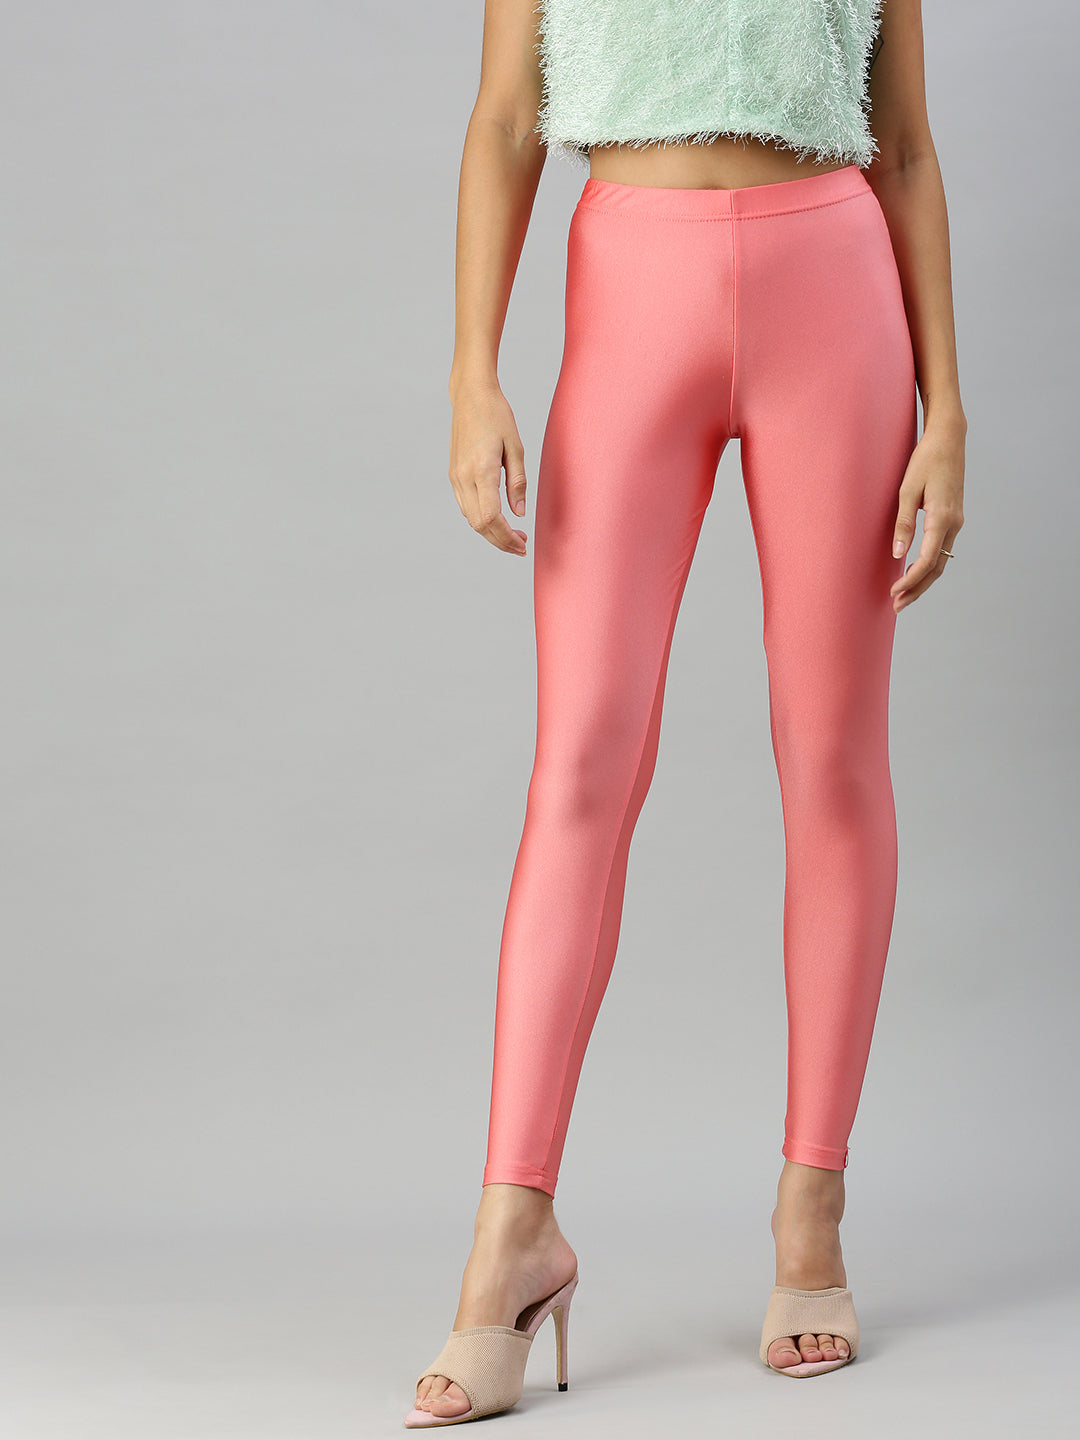 Shop Fern Ankle Leggings by Prisma for Stylish Comfort